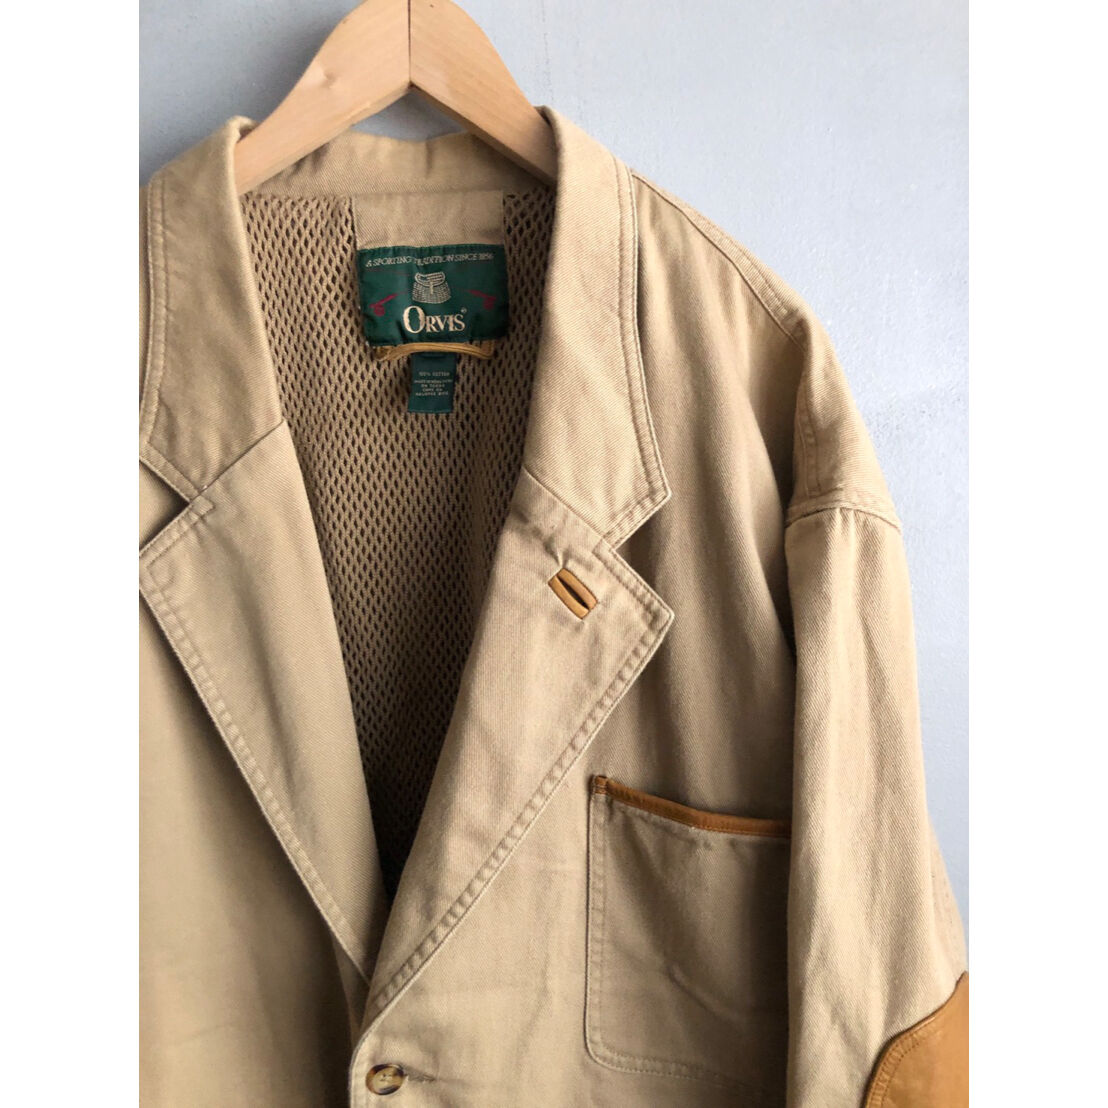 90s ORVIS FISHING TAILORED JACKET Size XL